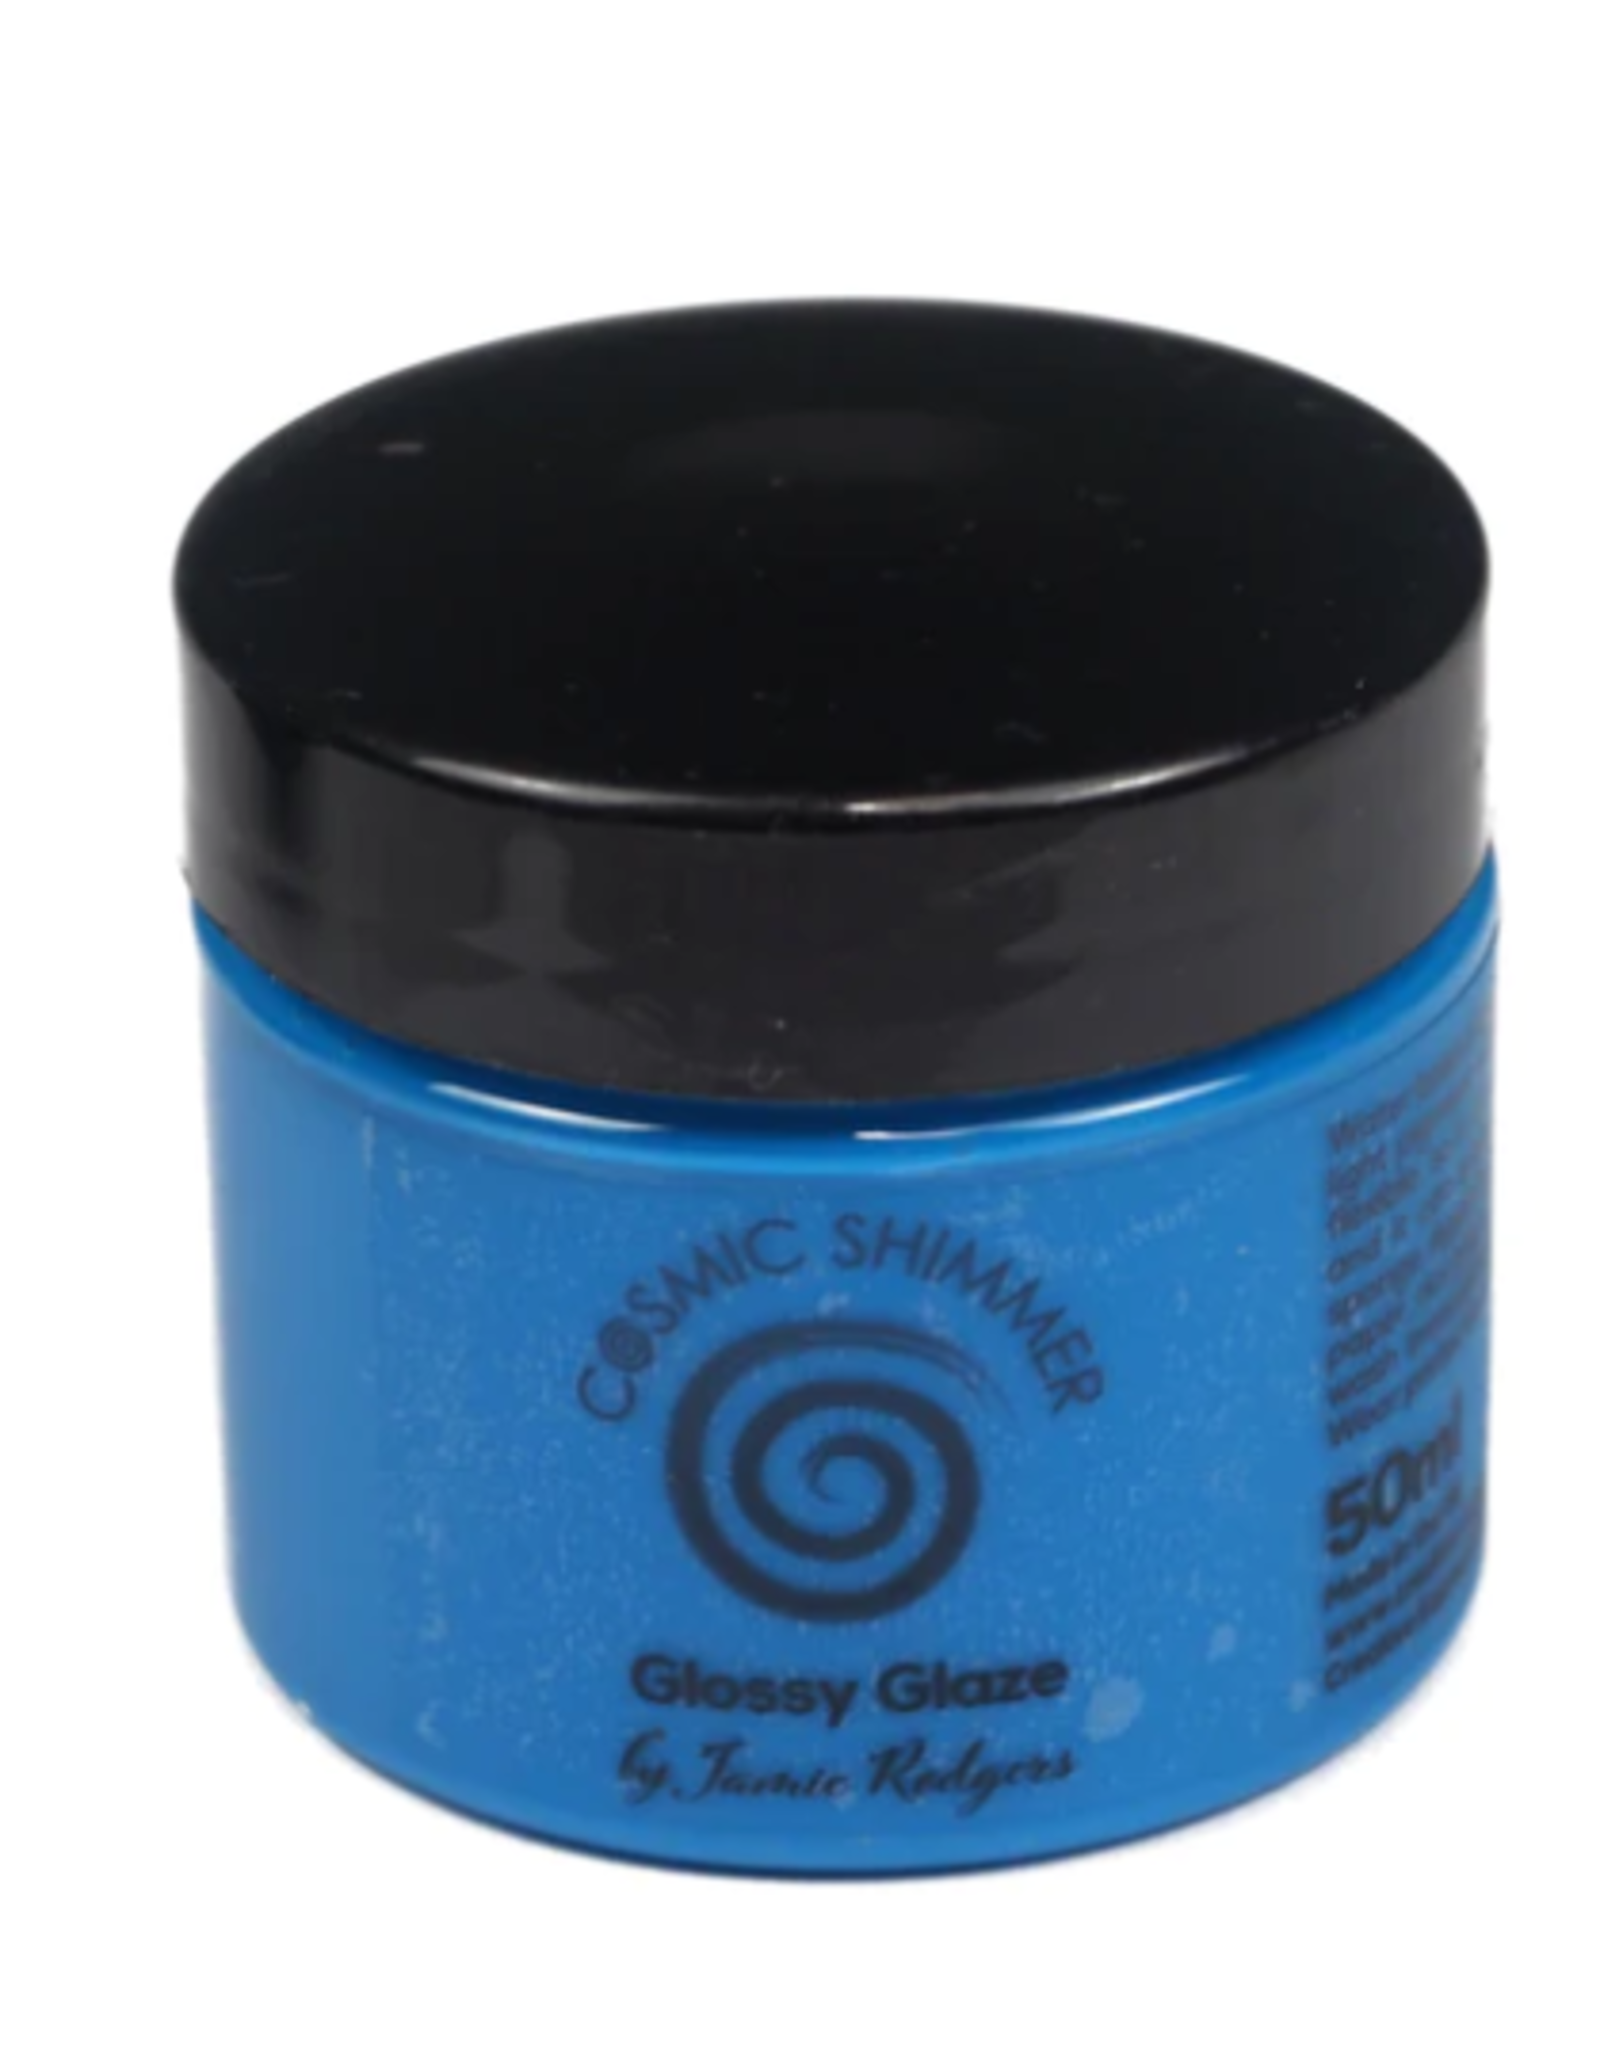 CREATIVE EXPRESSIONS CREATIVE EXPRESSION COSMIC SHIMMER JAMIE RODGERS CURIOUS BLUE GLOSSY GLAZE 50ml